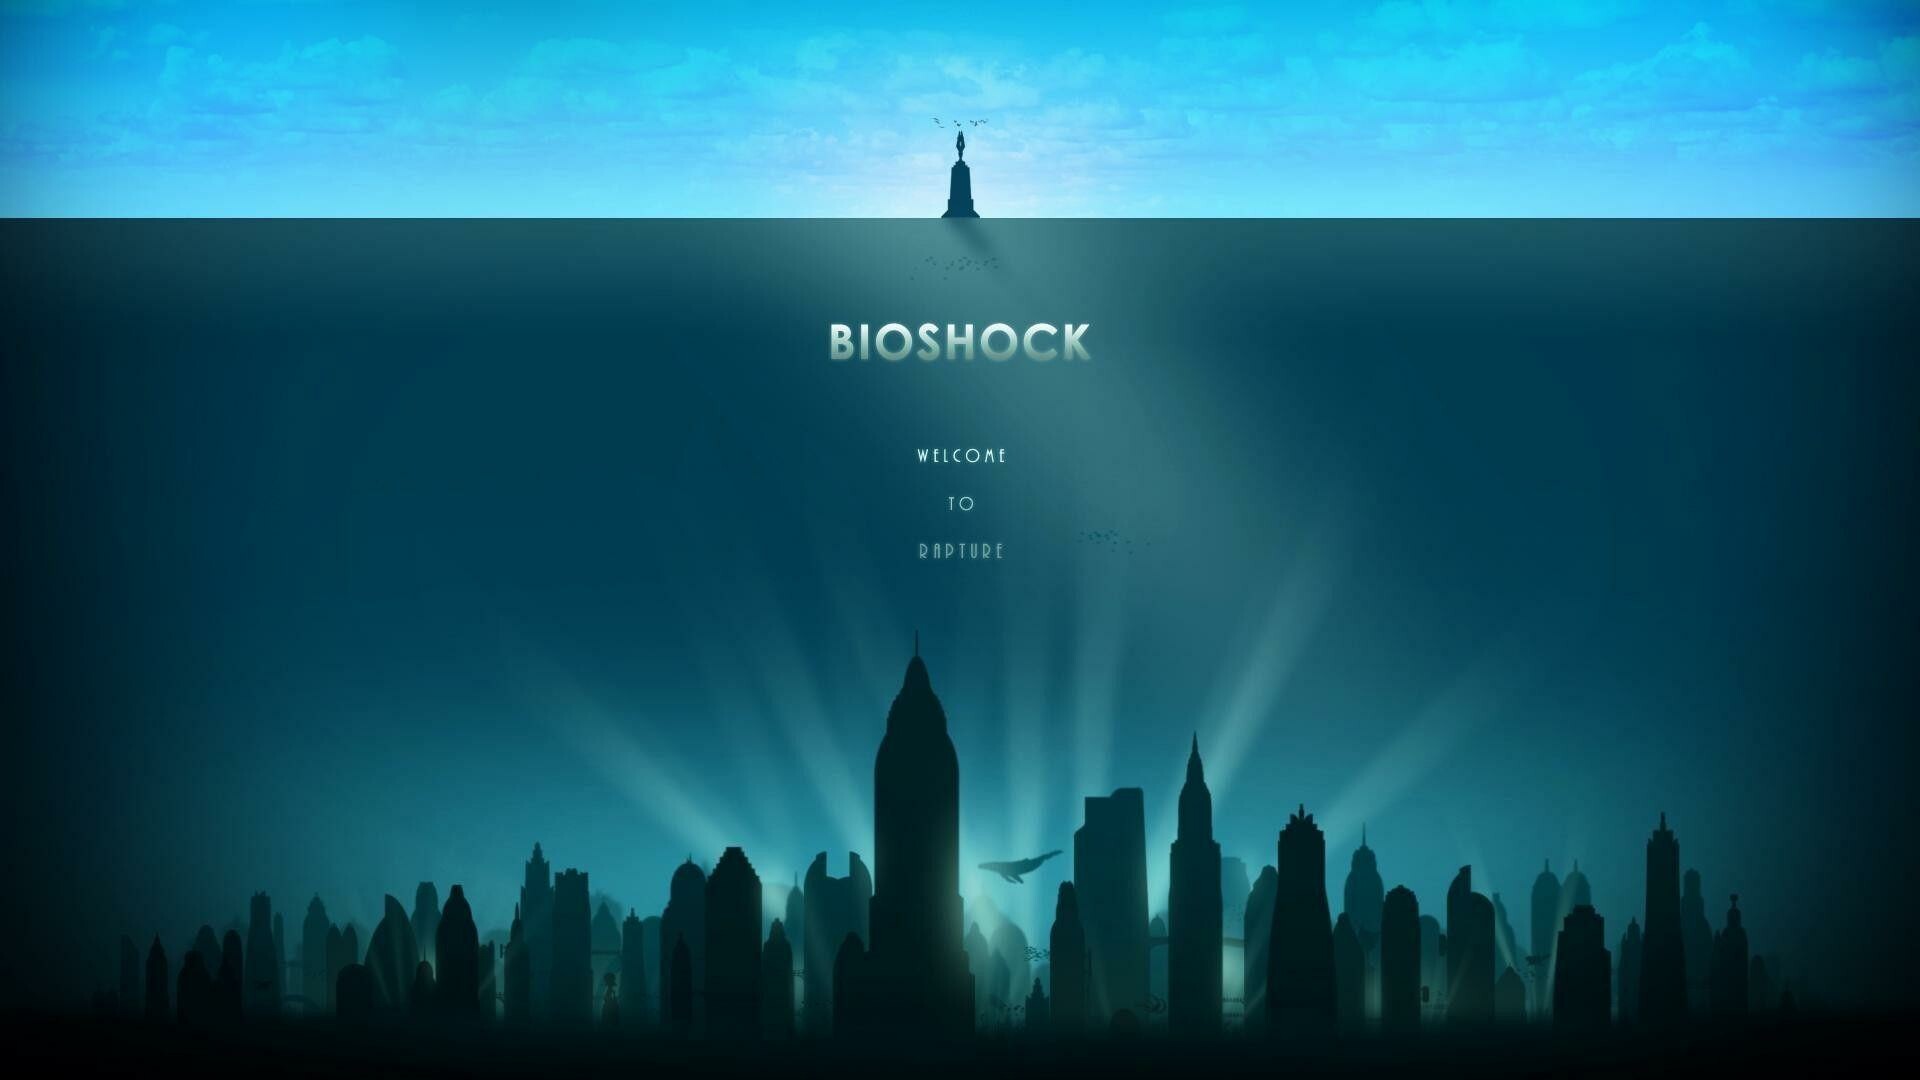 BioShock: A shooter, Journey to the cities of Rapture and Columbia. 1920x1080 Full HD Background.